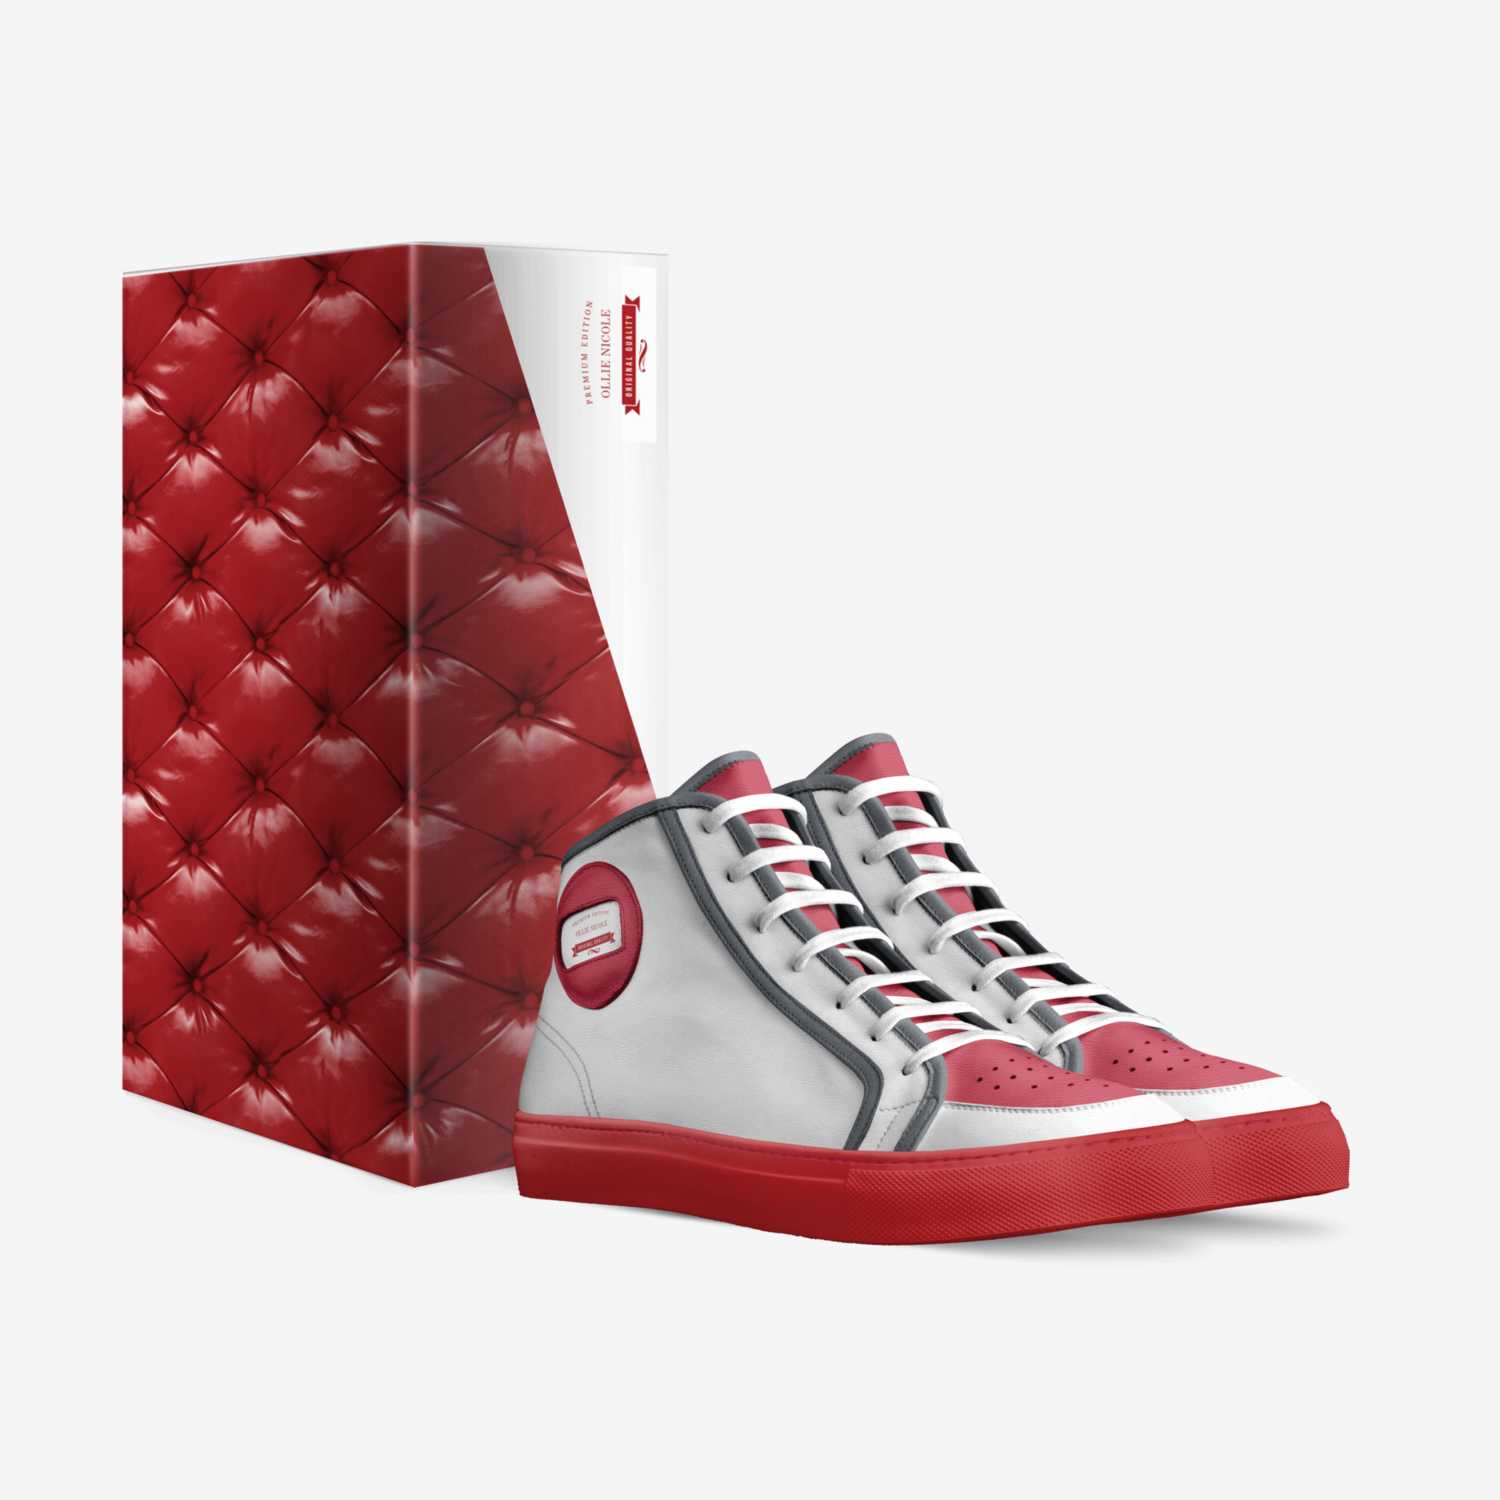 Style Buckeyes custom made in Italy shoes by Ollie Nicole | Box view